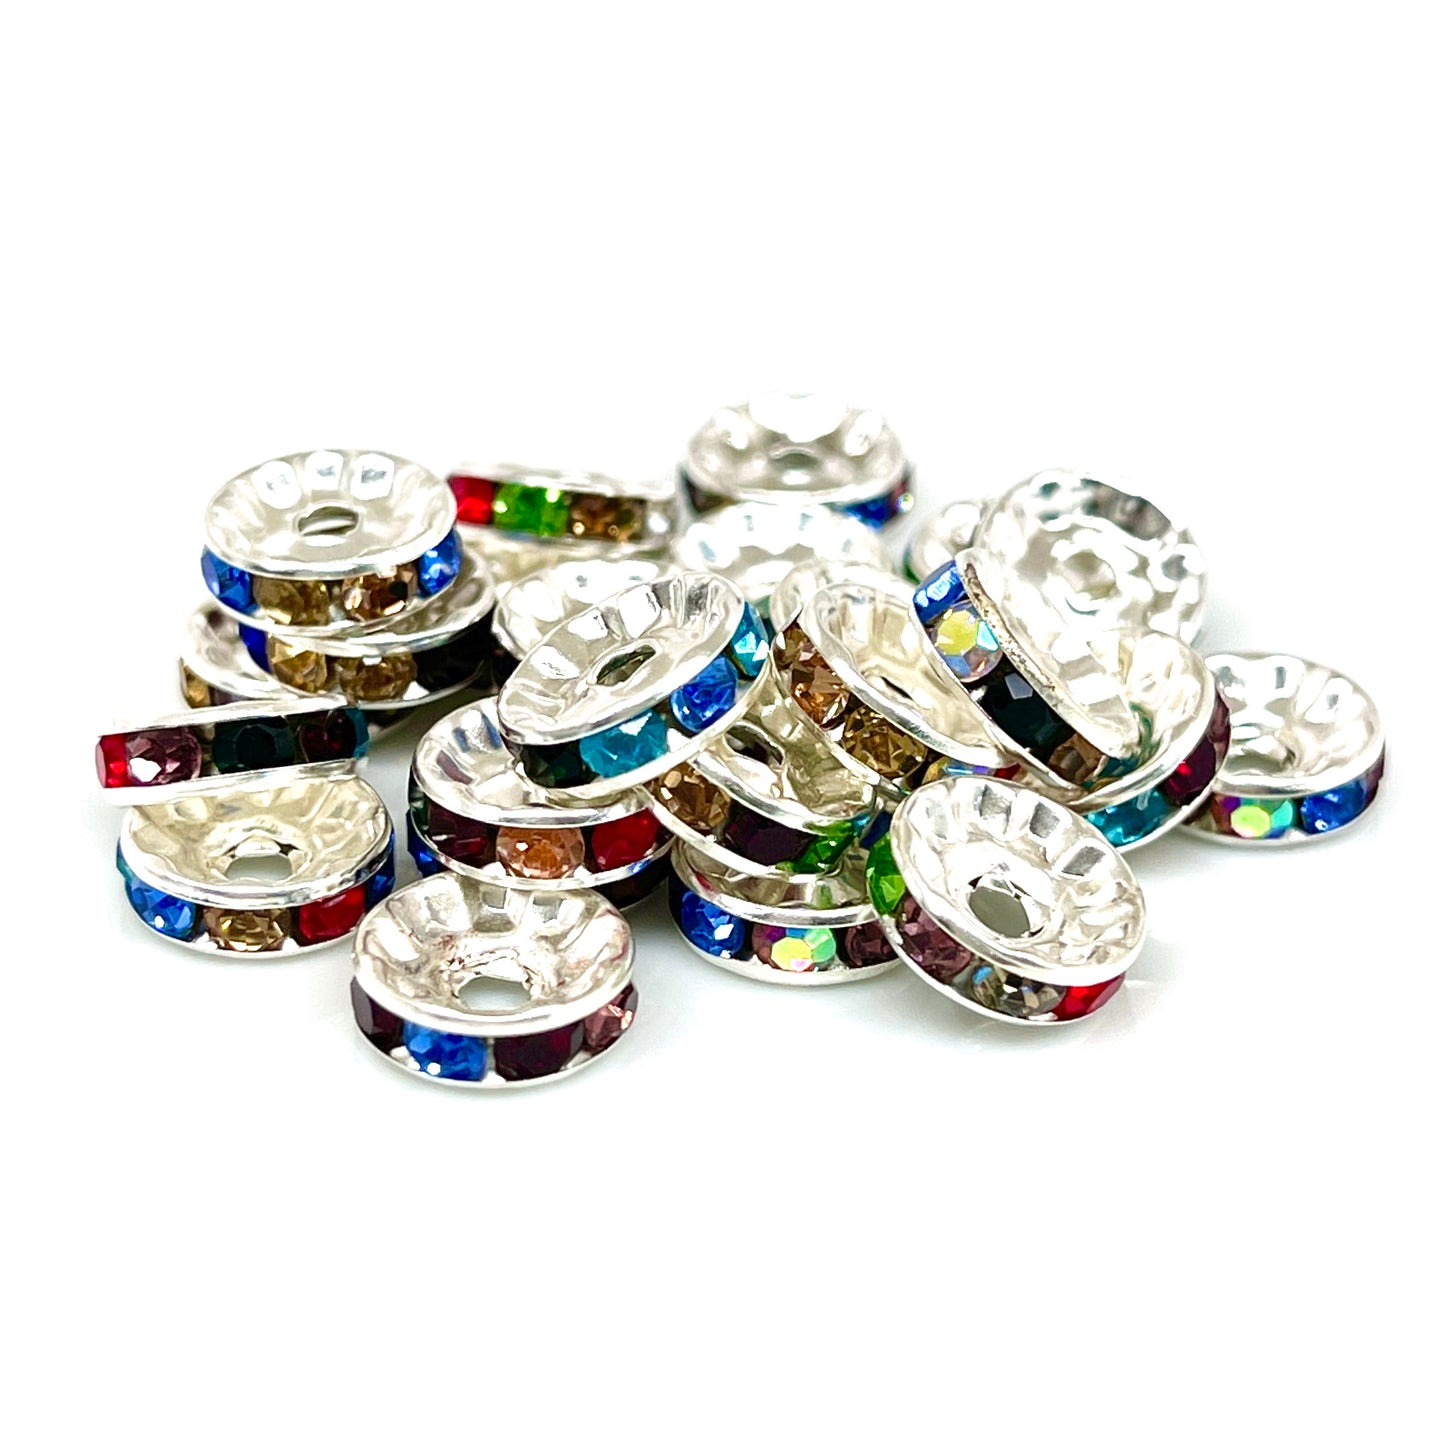 Multi-Color Rhinestone Spacer Beads - 10mm